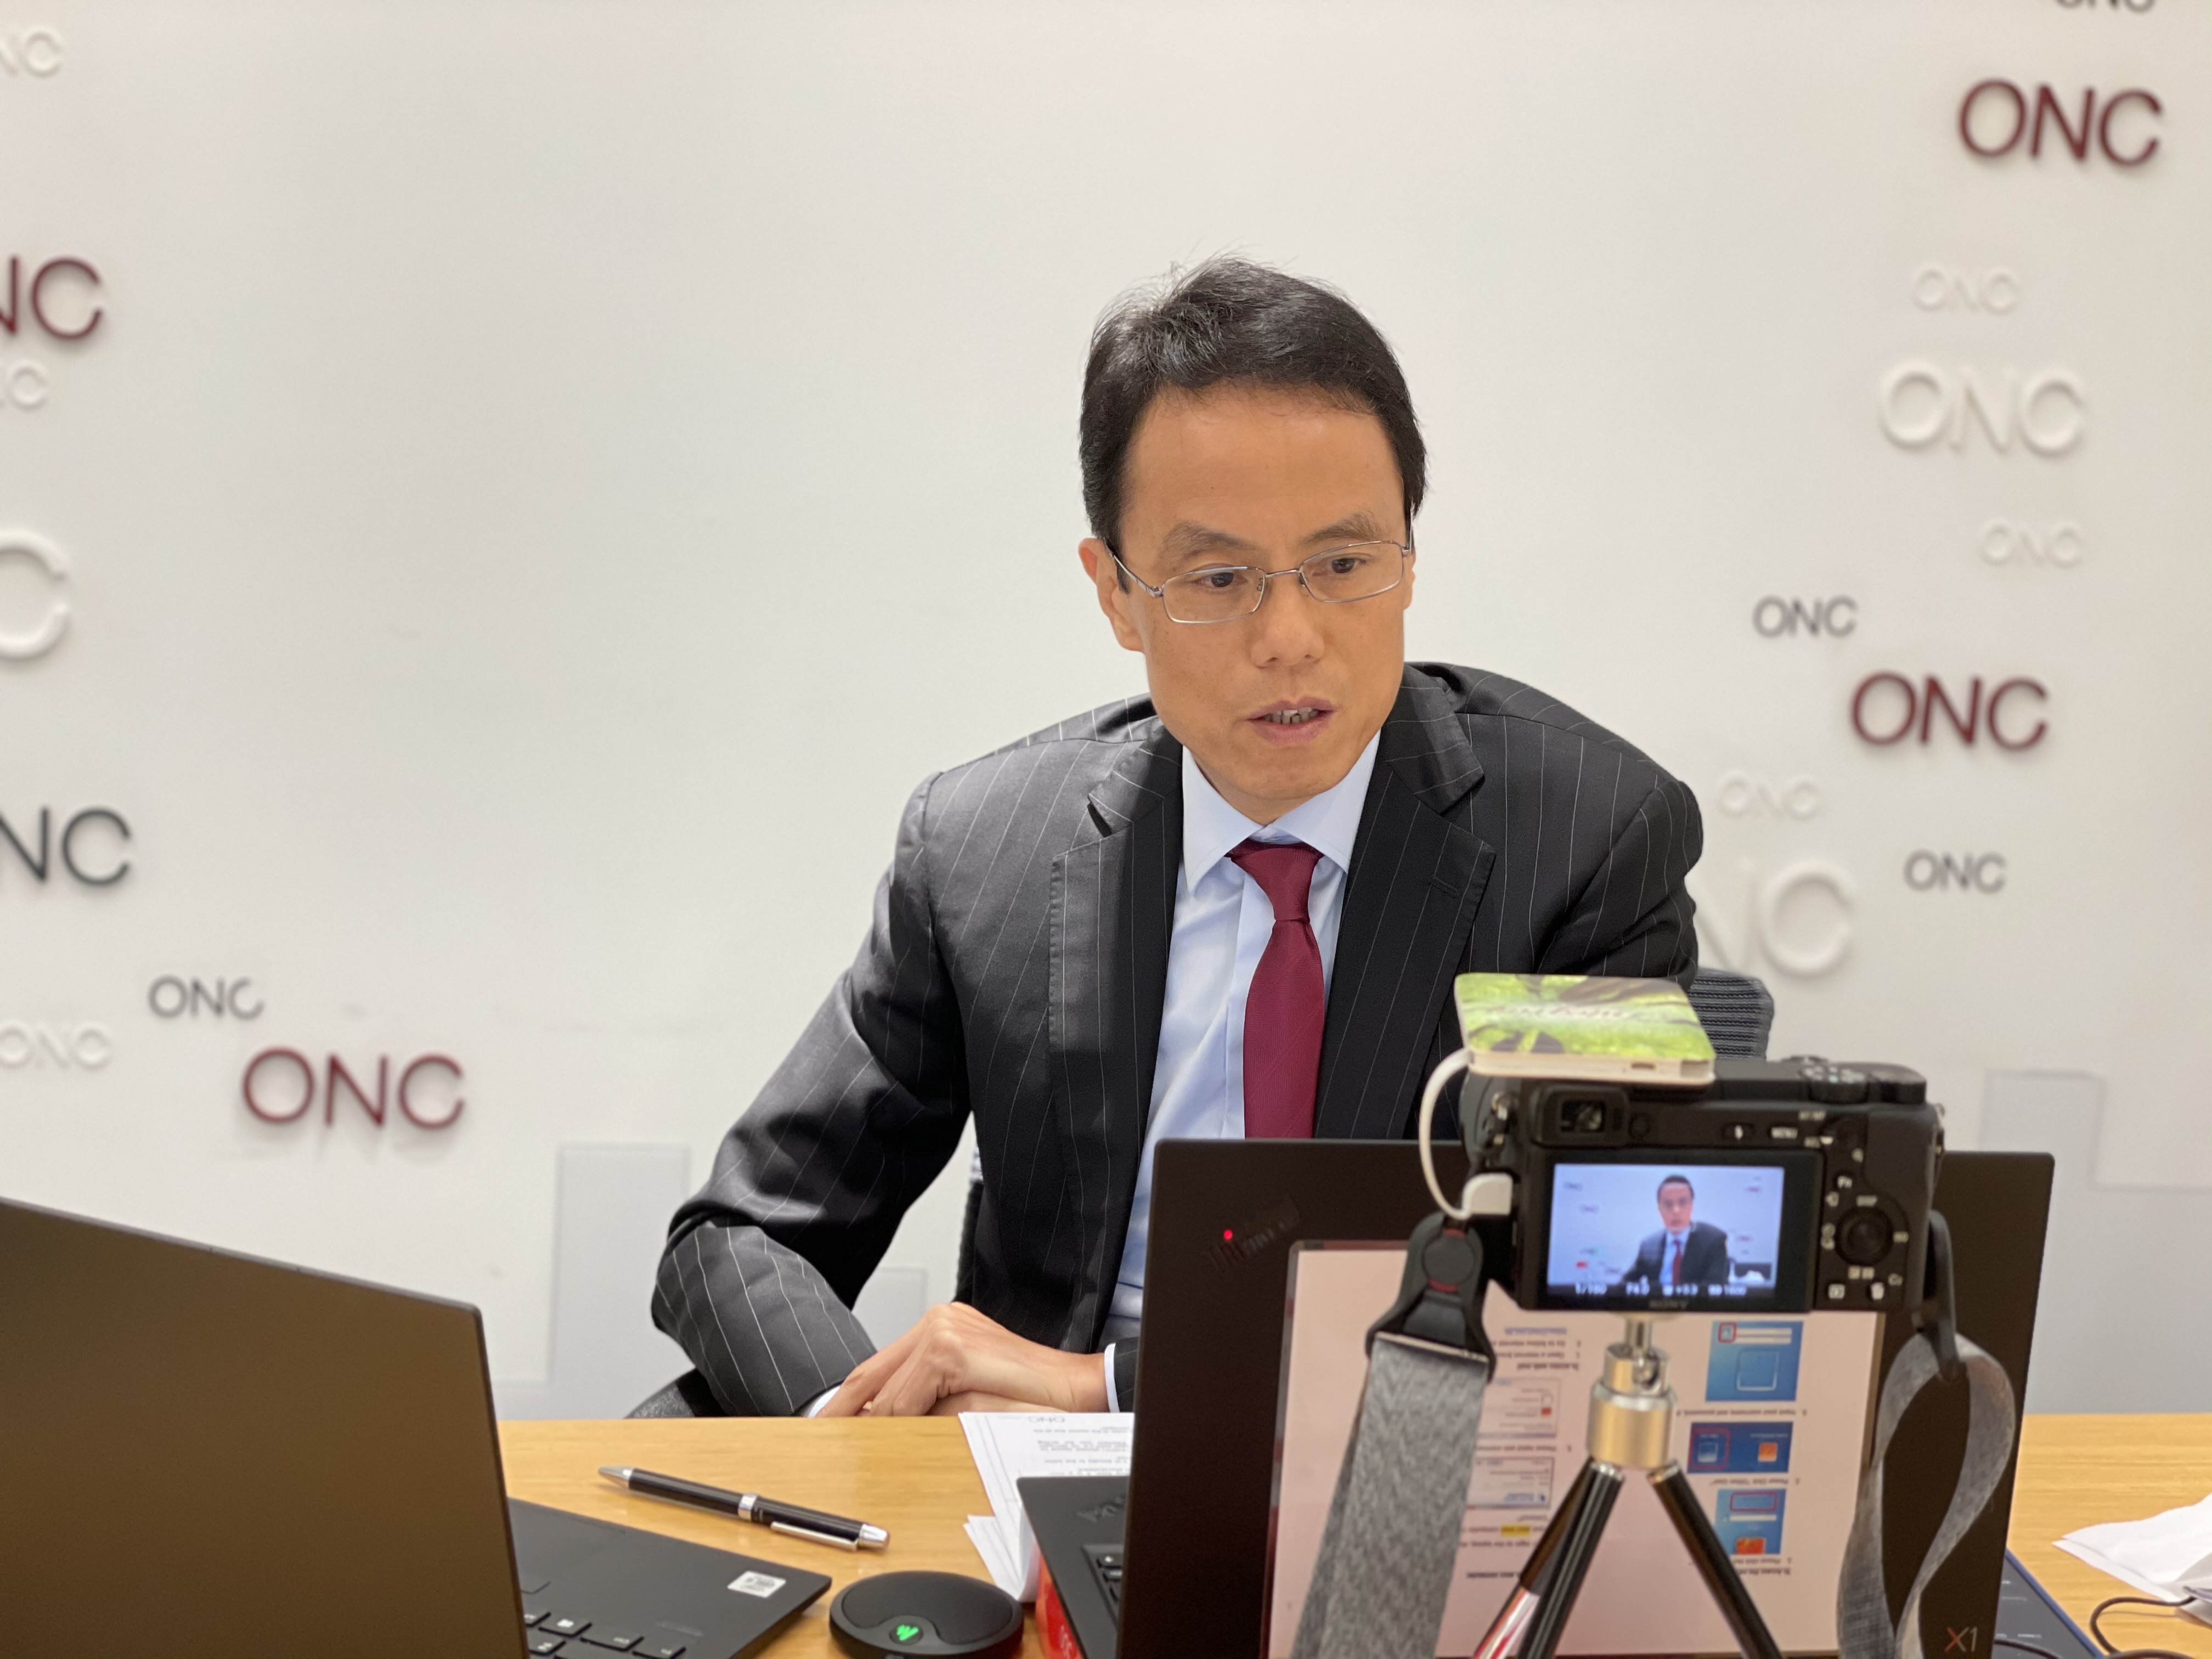 Mr Ludwig Ng gave an Risk Management Education webinar for the Hong Kong Academy of Law on Common Litigation Mistakes. 伍兆榮律師為香港法律專業學會的風險管理網上課程講解常見訴訟錯誤